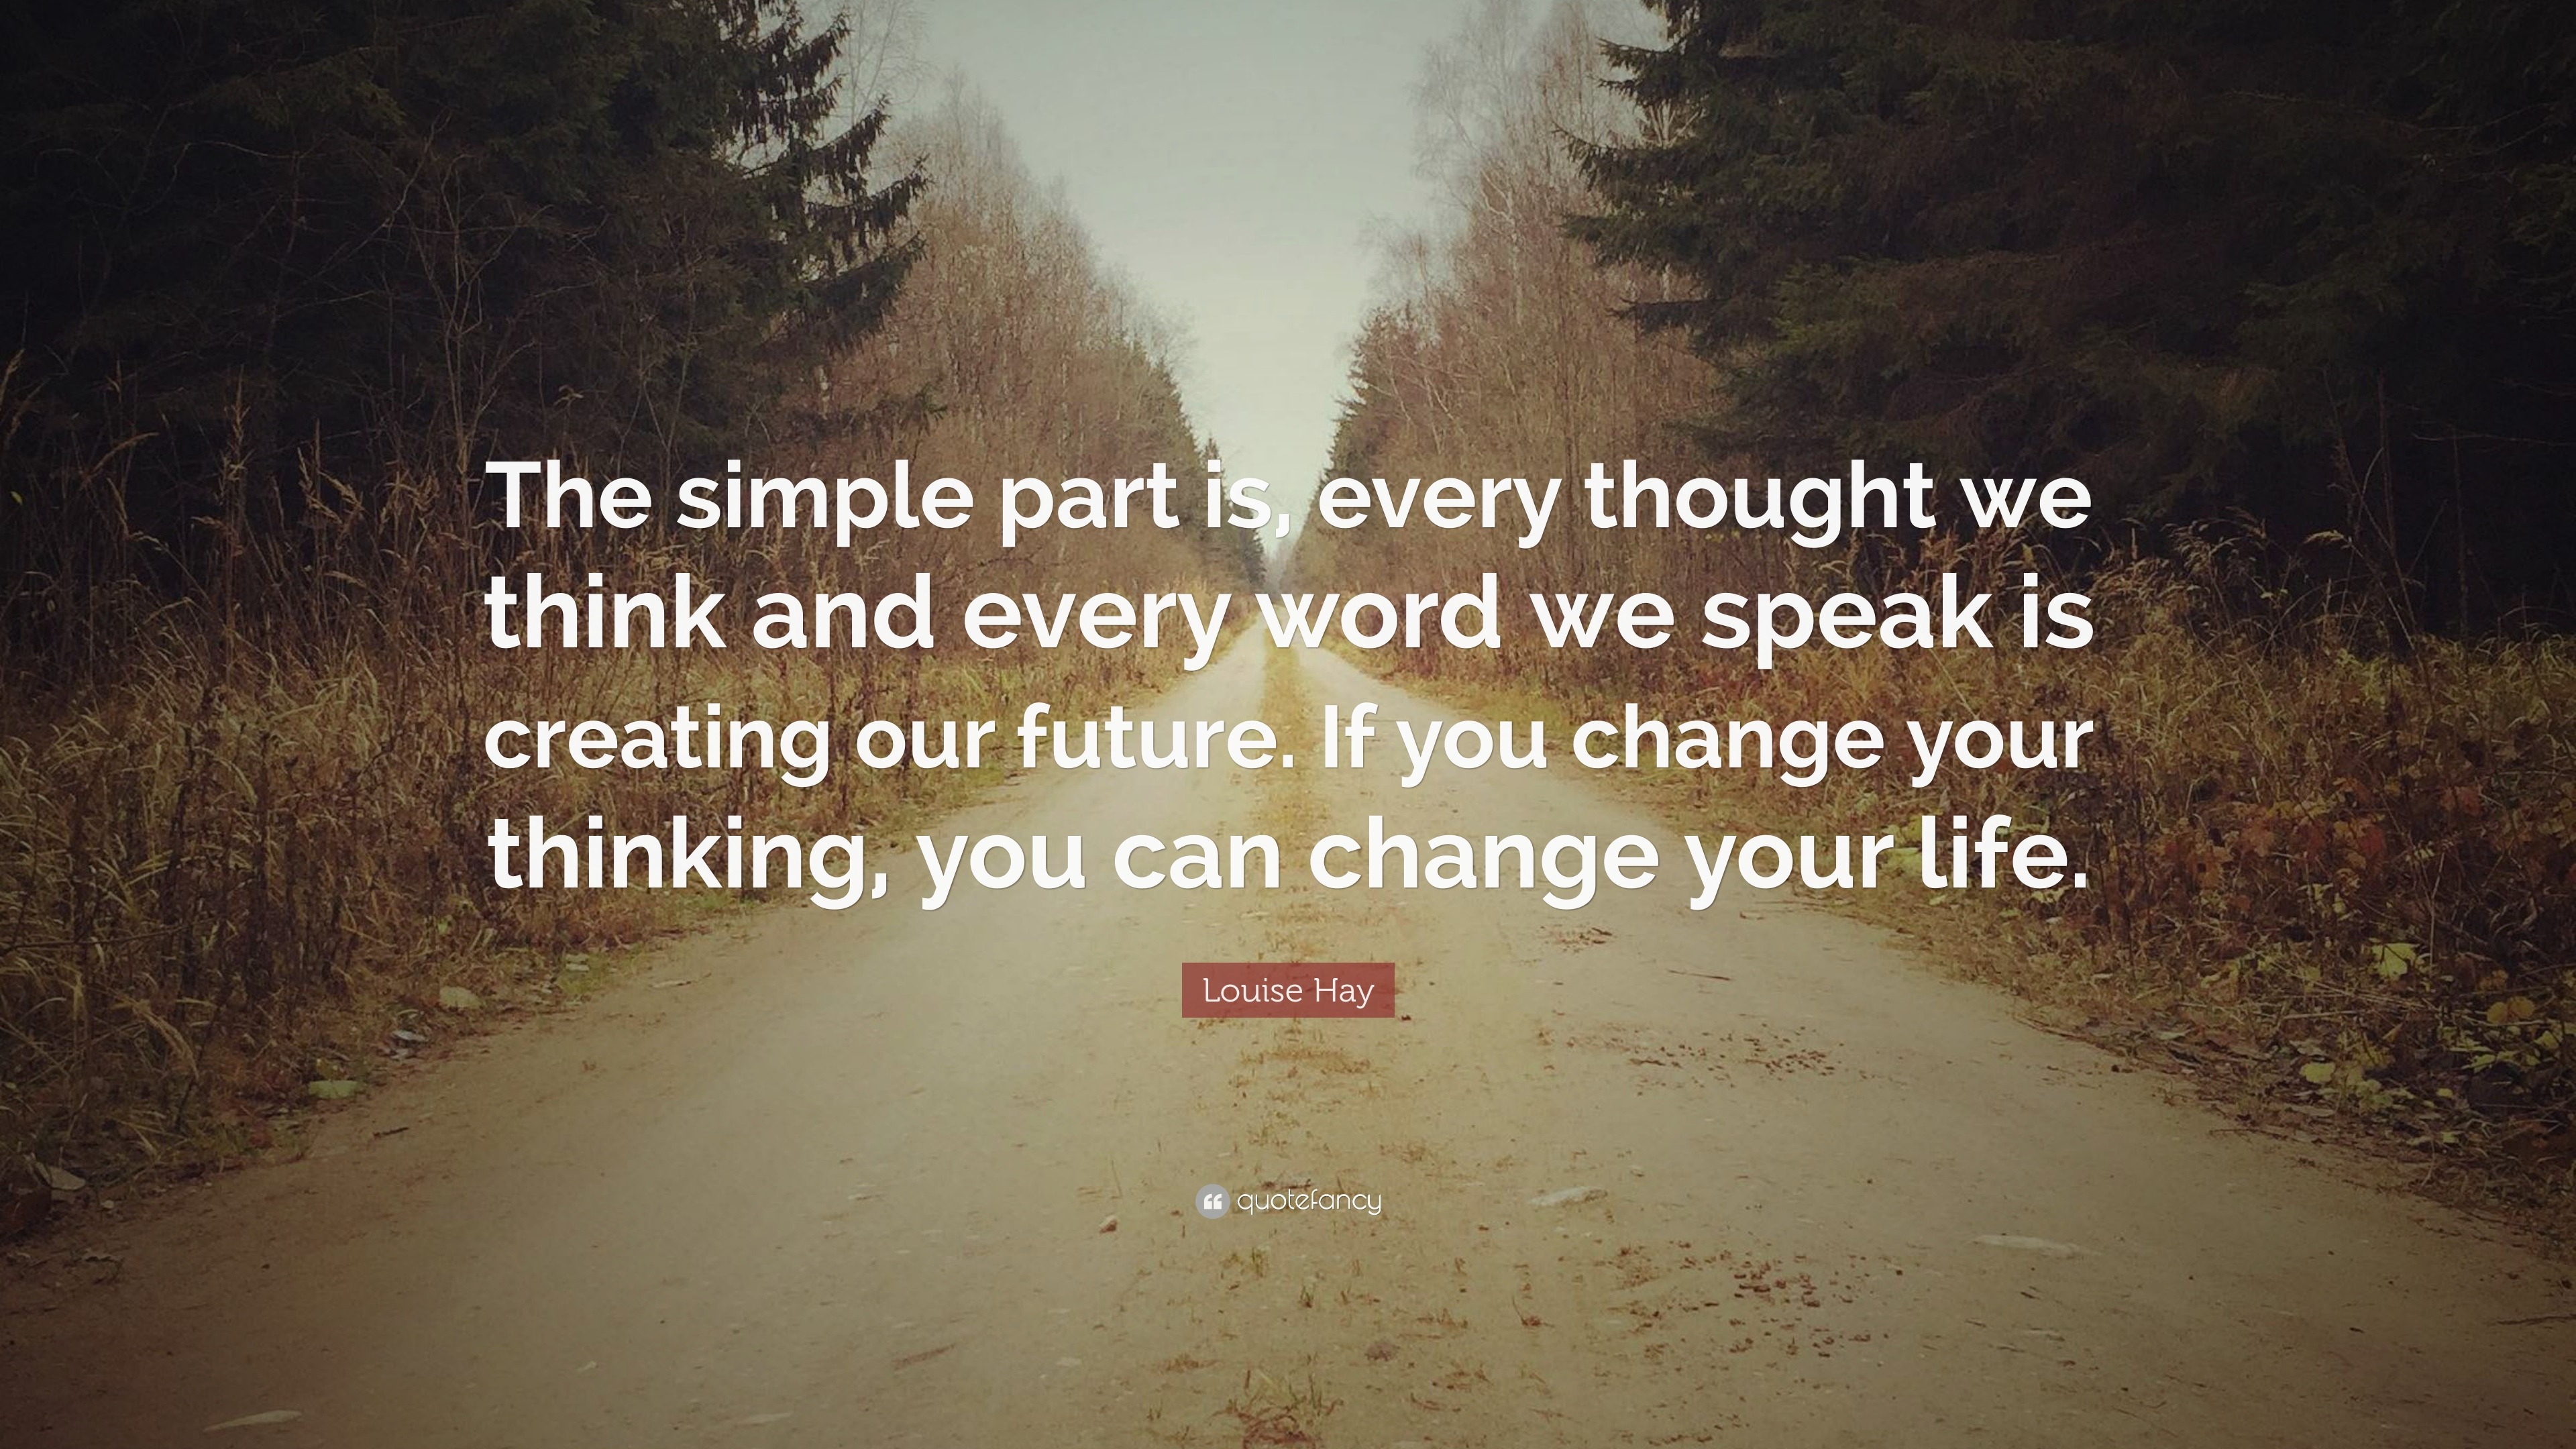 Louise Hay Quote: “The simple part is, every thought we think and every ...